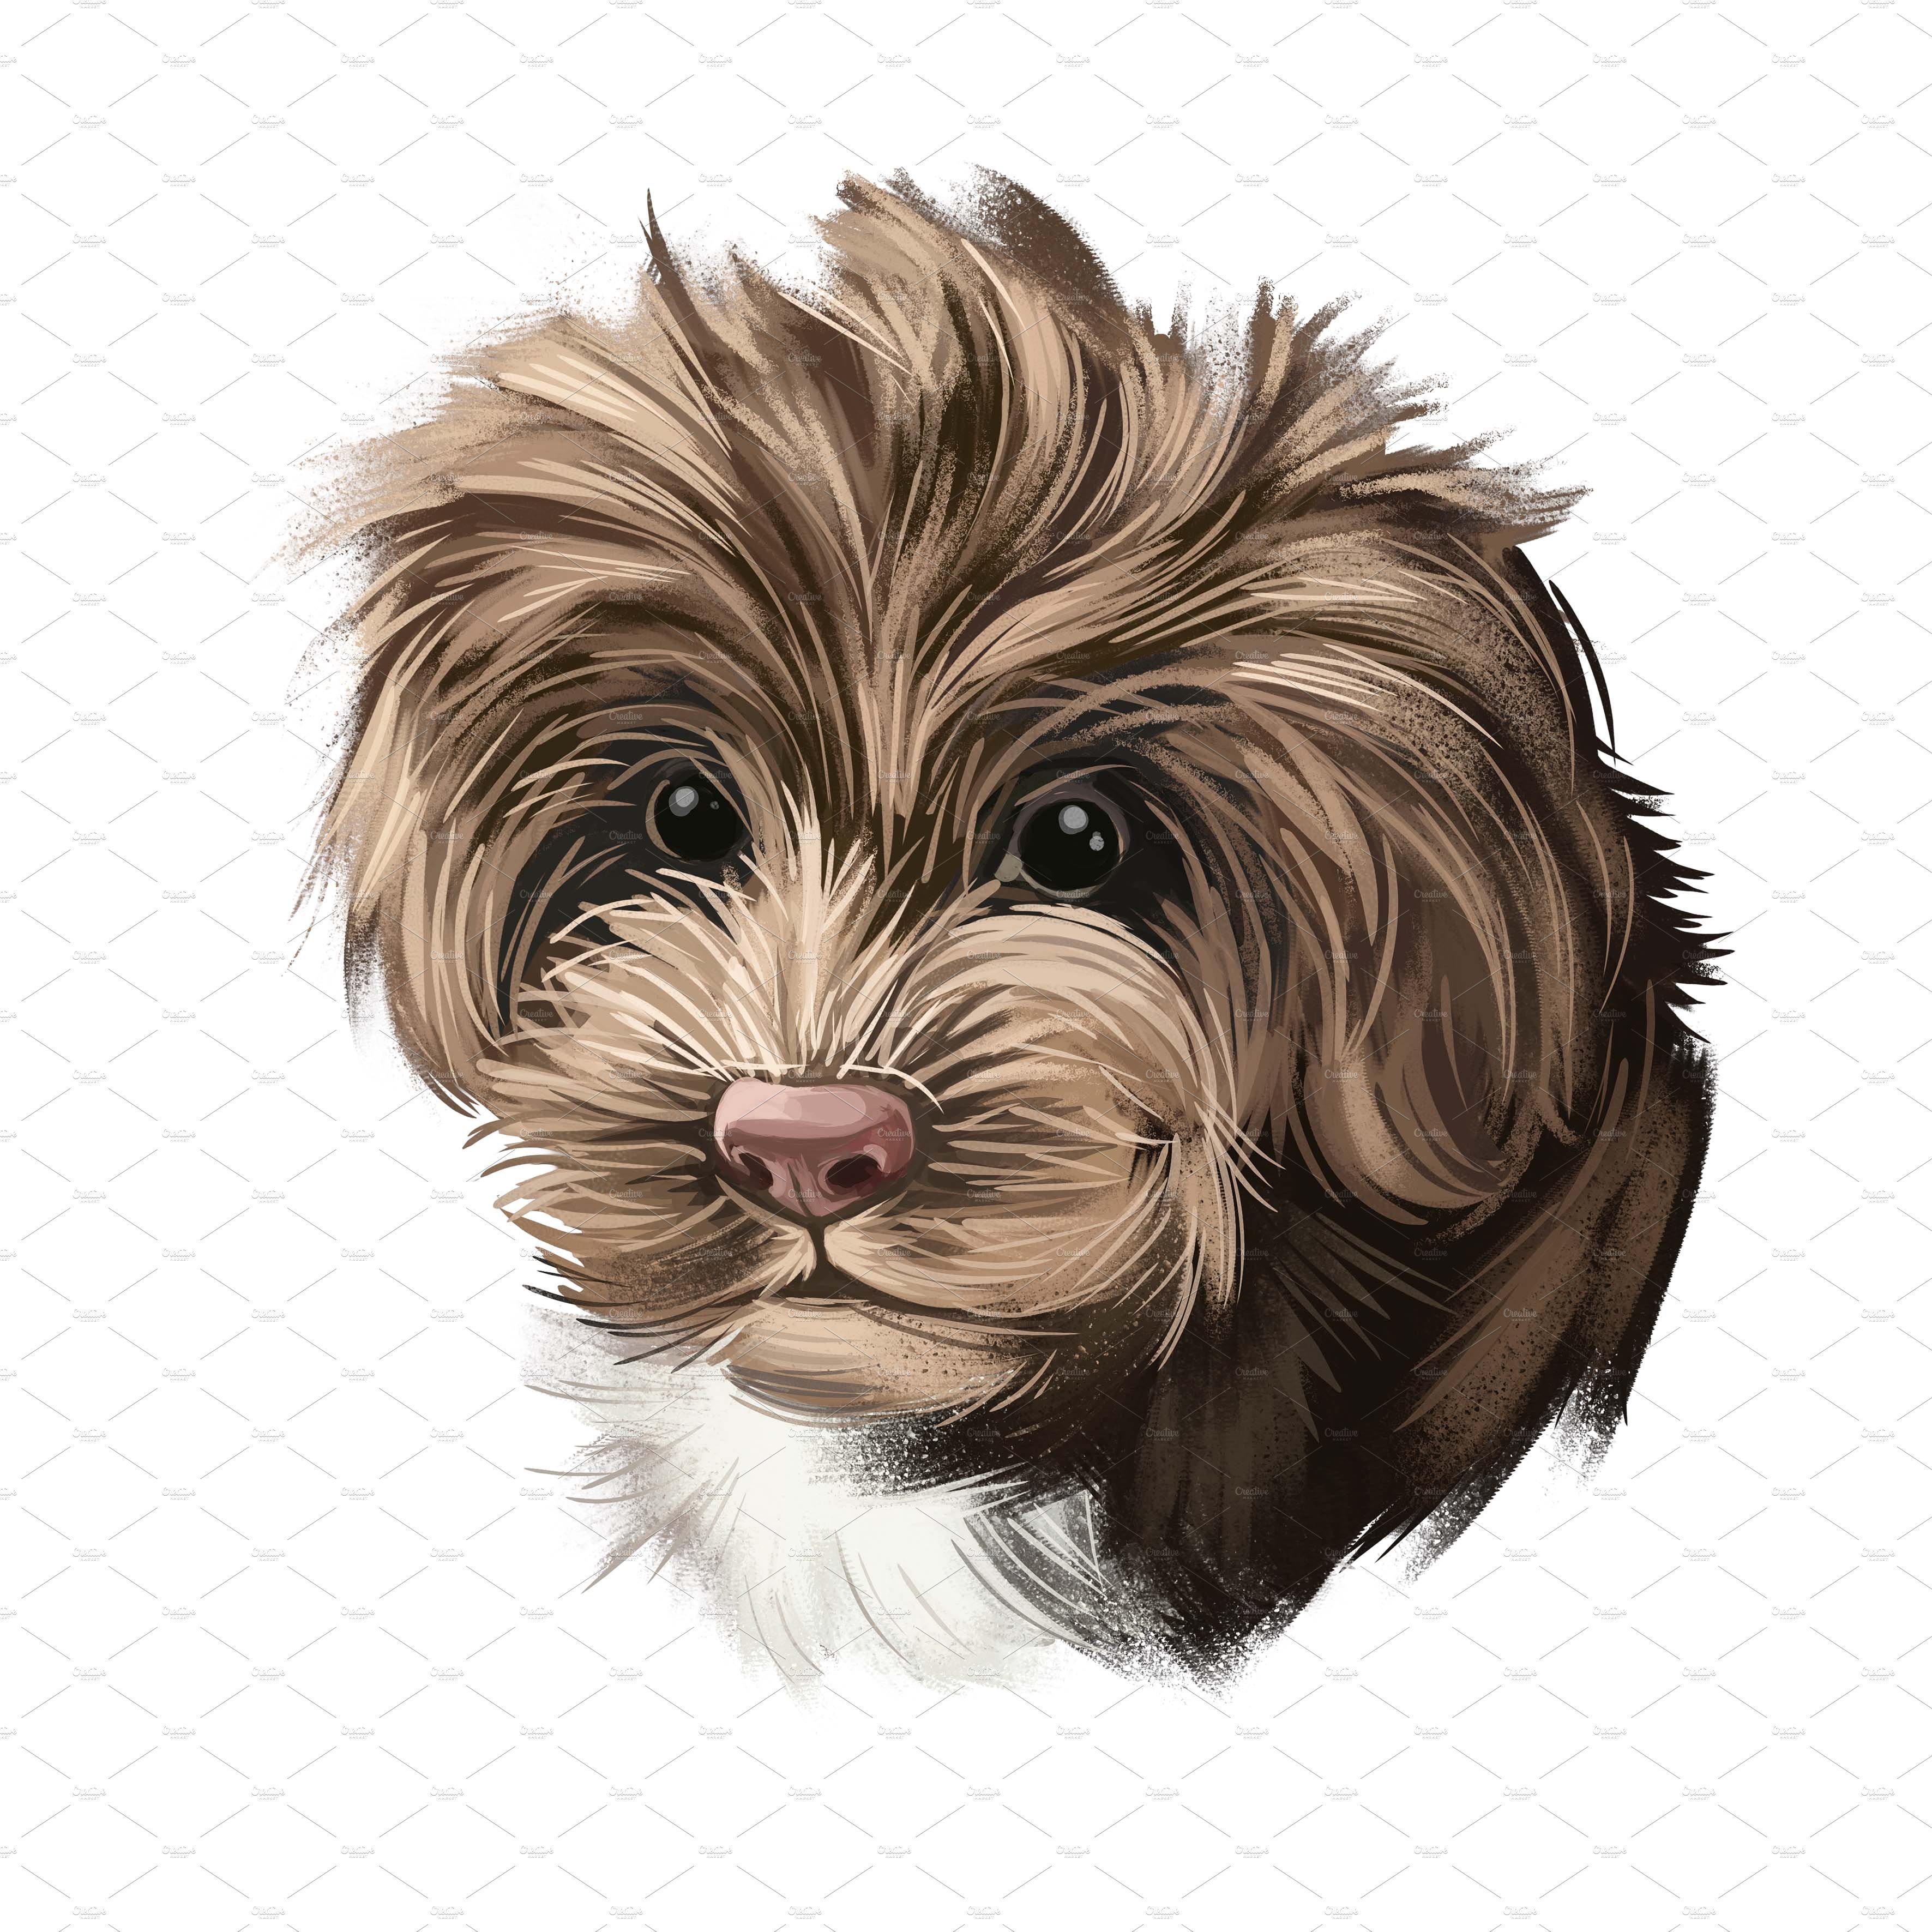 25. sproodle puppy png 28229 612